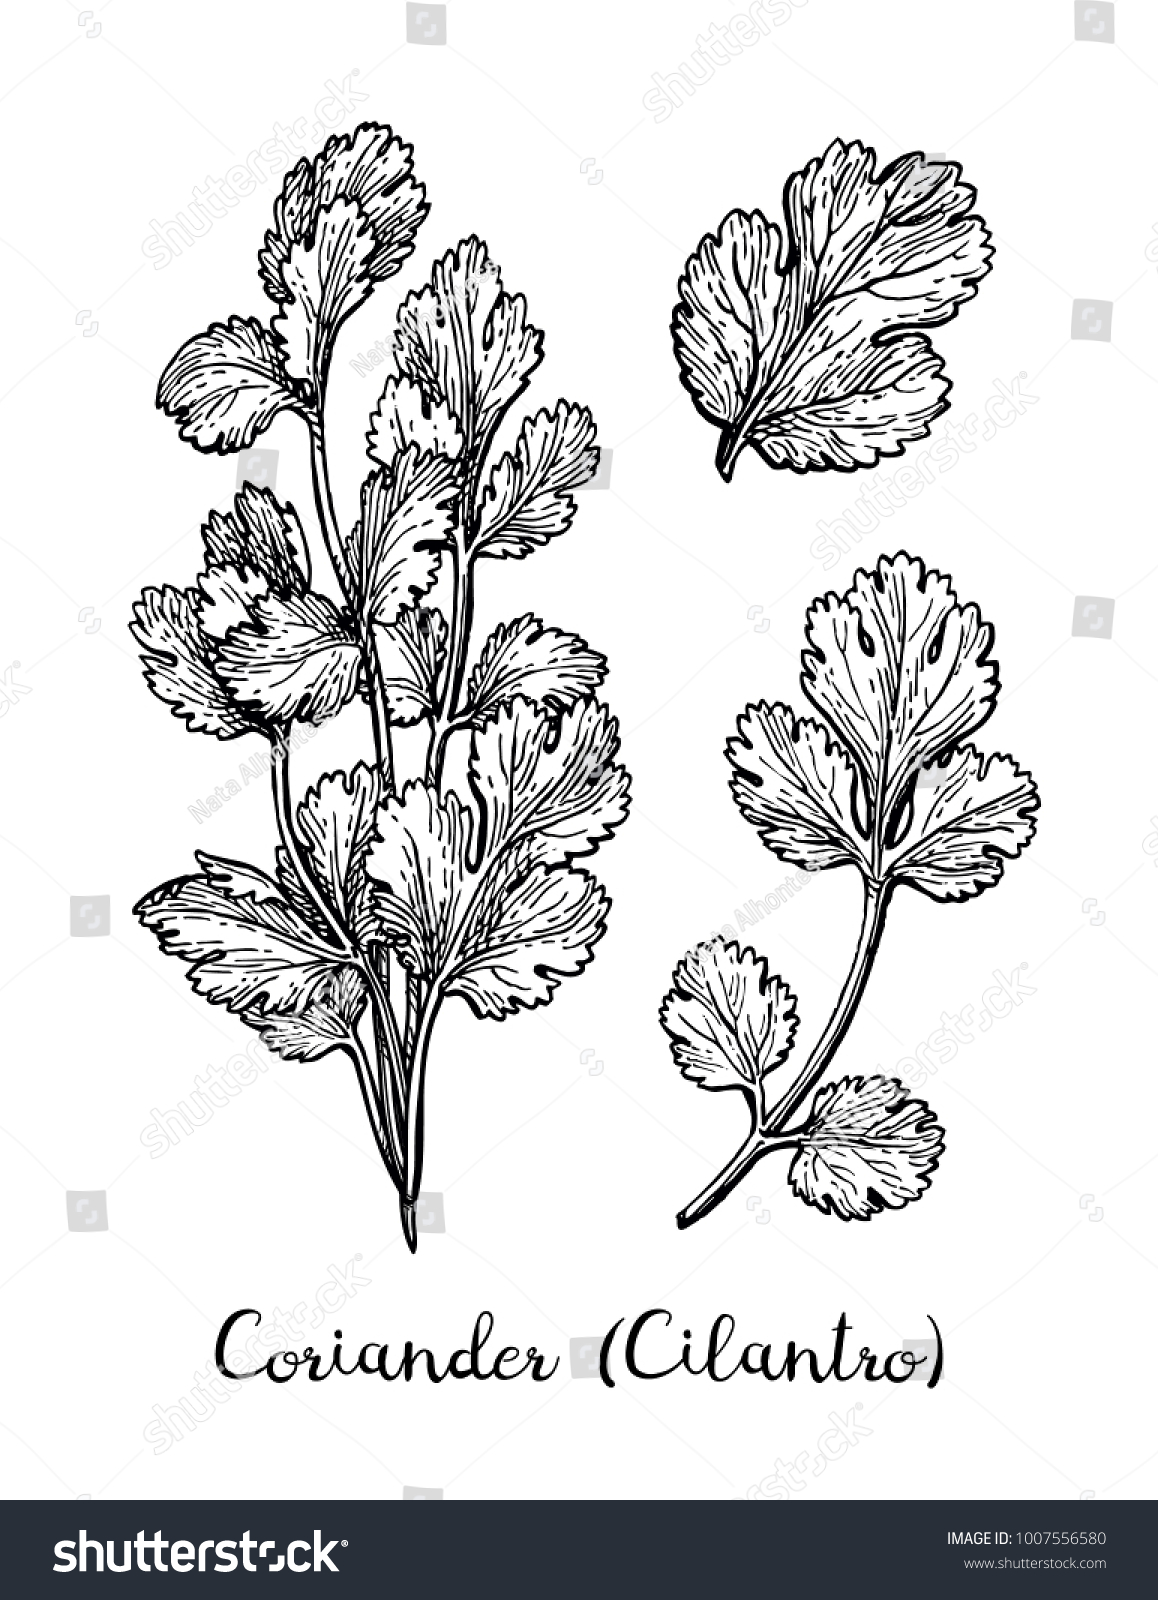 Coriander, also known as cilantro or Chinese parsley. Ink sketch set isolated on white background. Hand drawn vector illustration. Retro style. #1007556580